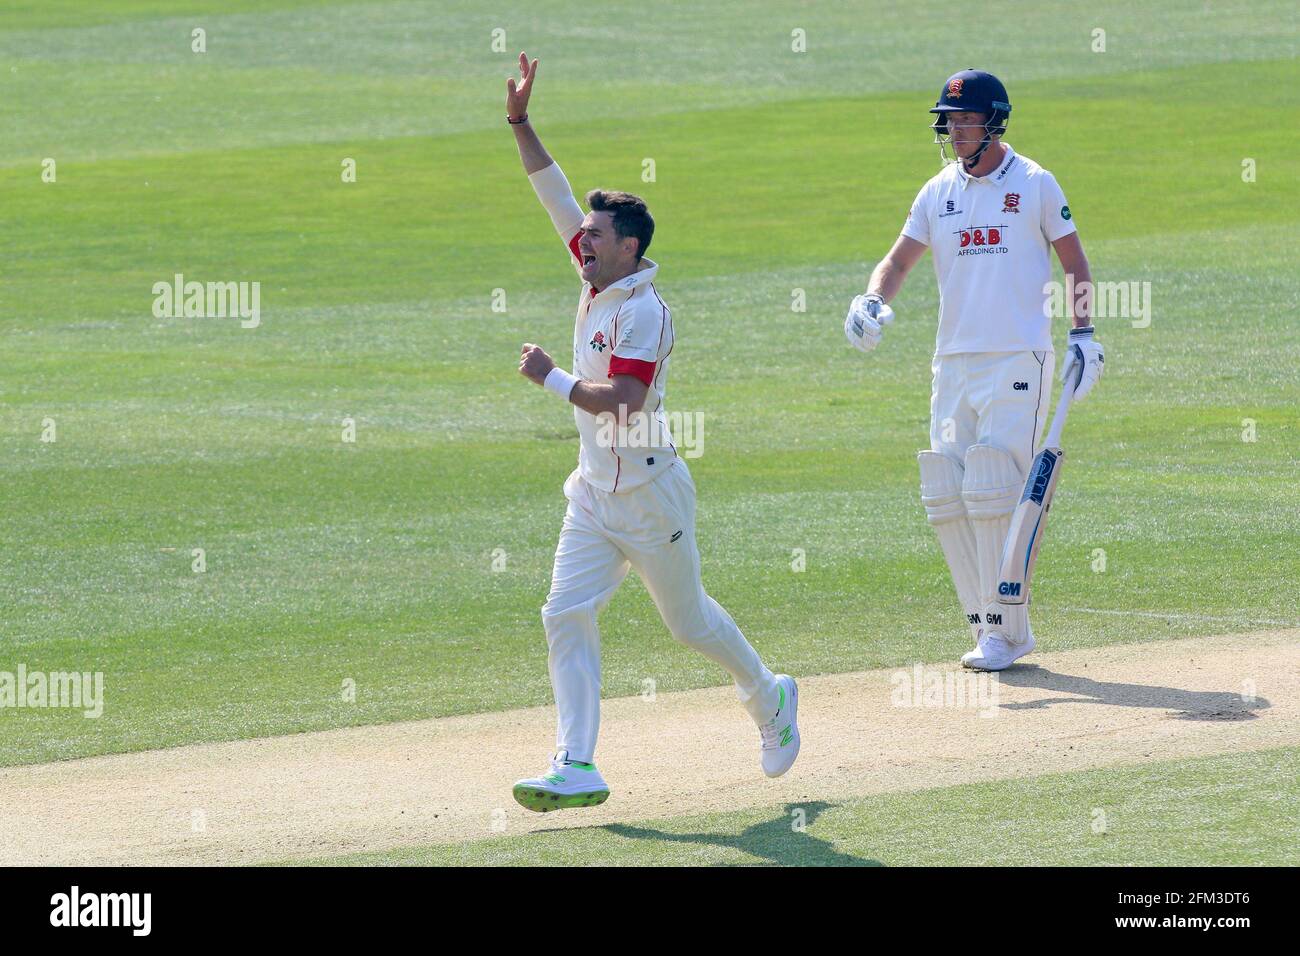 Jimmy Anderson of Lancashire with an appeal for a wicket during Essex CCC vs Lancashire CCC, Specsavers County Championship Division 1 Cricket at The Stock Photo